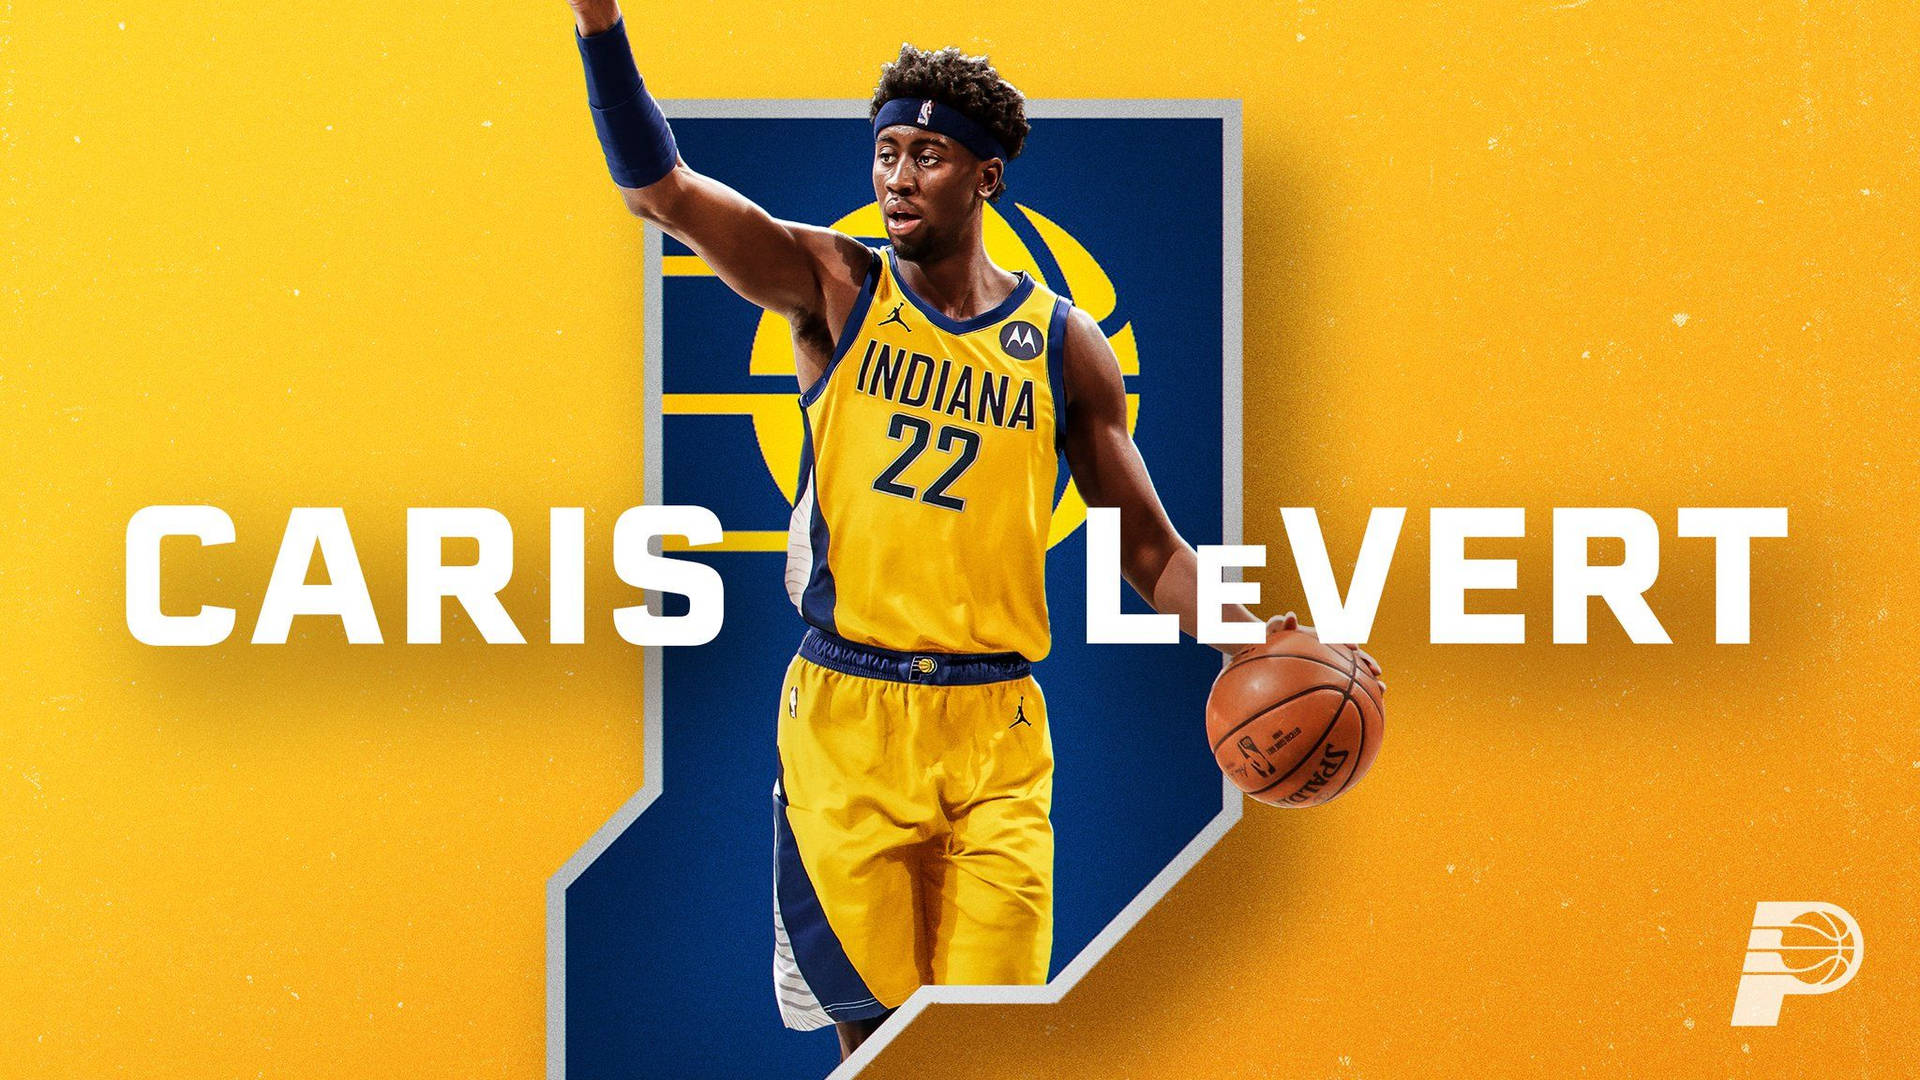 Indiana Caris Levert Digital Cover Background